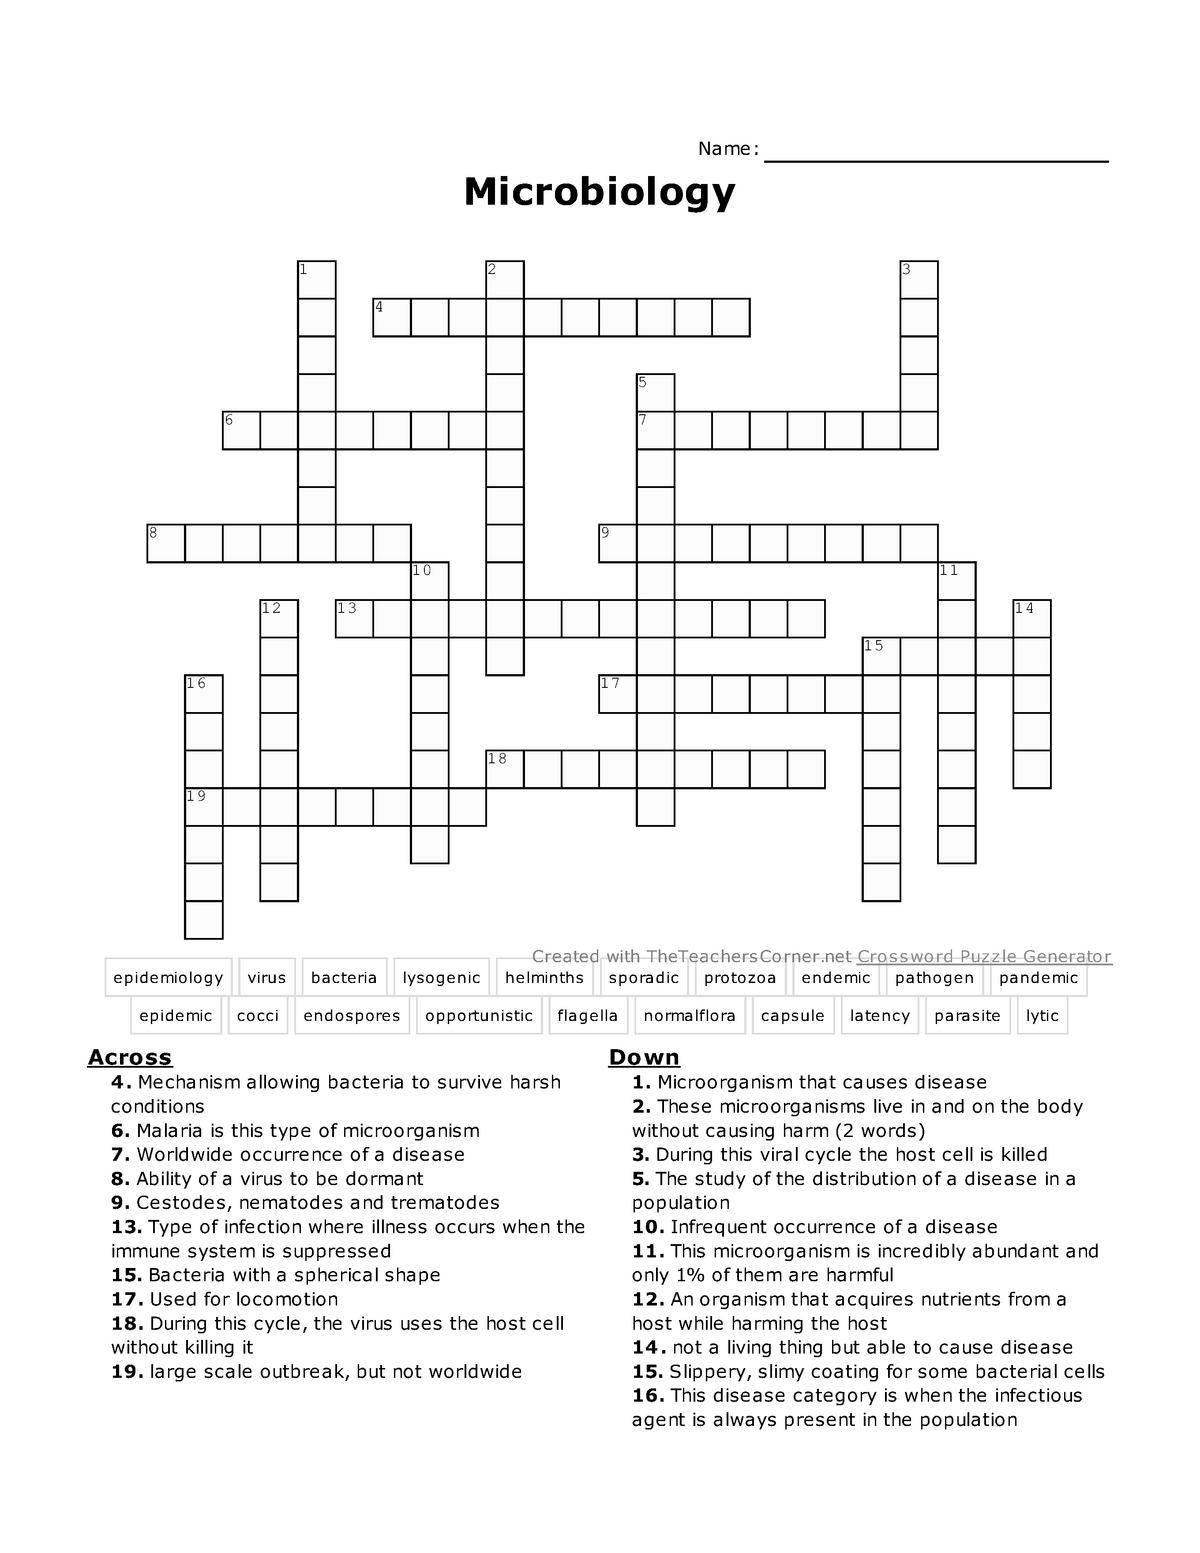 Microbiology crossword Name: Microbiology 1 2 3 4 5 6 7 8 9 10 12 11